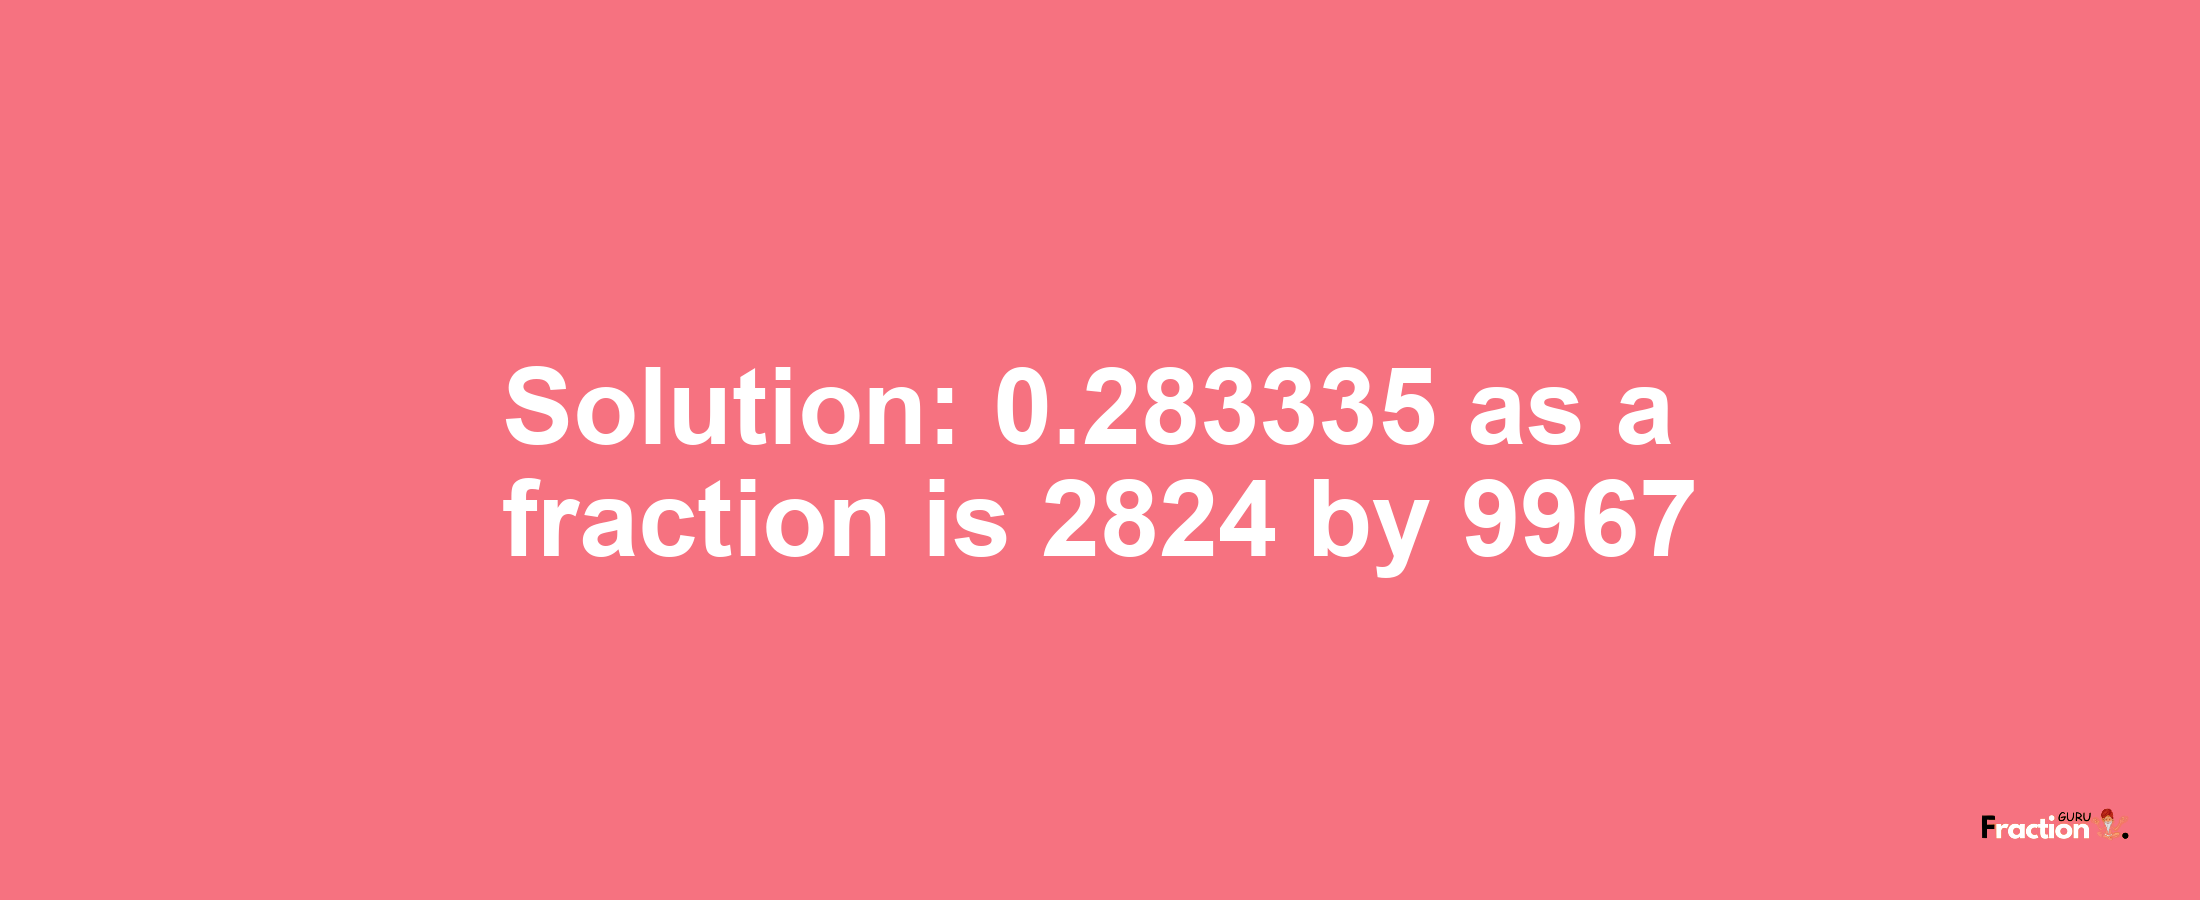 Solution:0.283335 as a fraction is 2824/9967